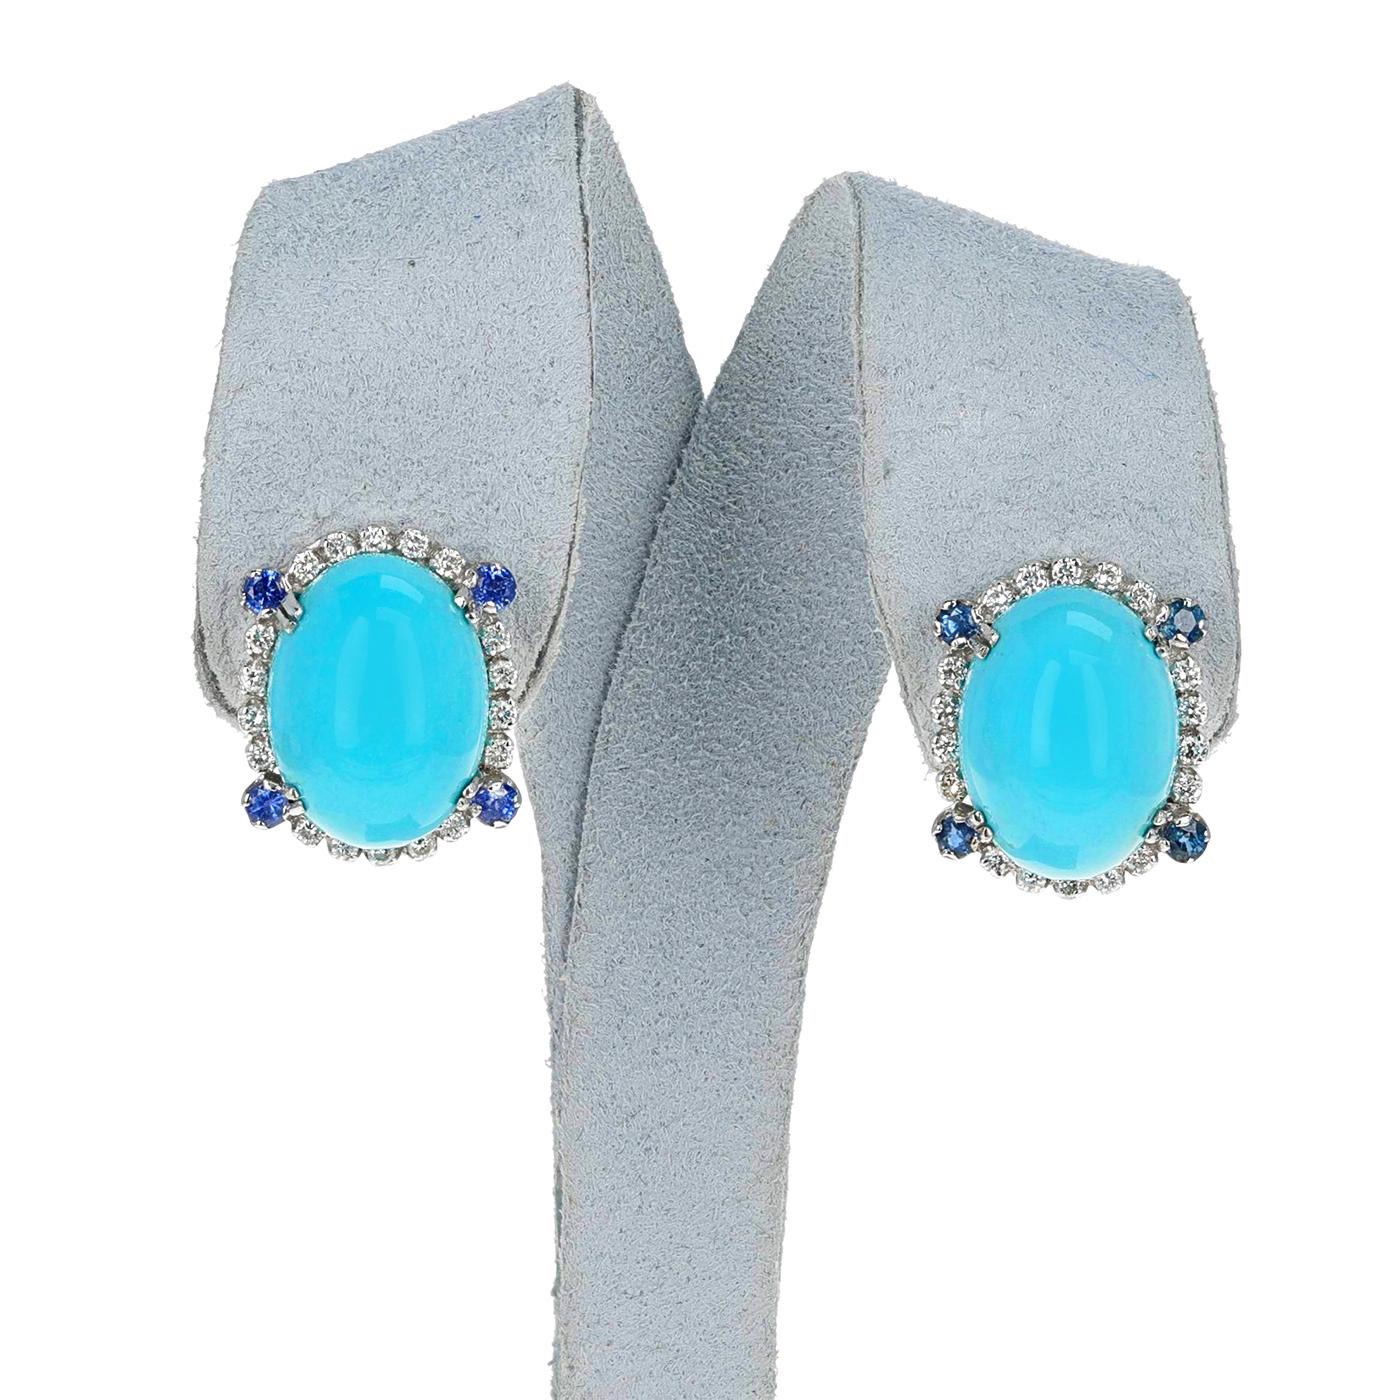 Women's or Men's Turquoise Oval Cabochon Earrings with Diamonds and Sapphire, 18k For Sale